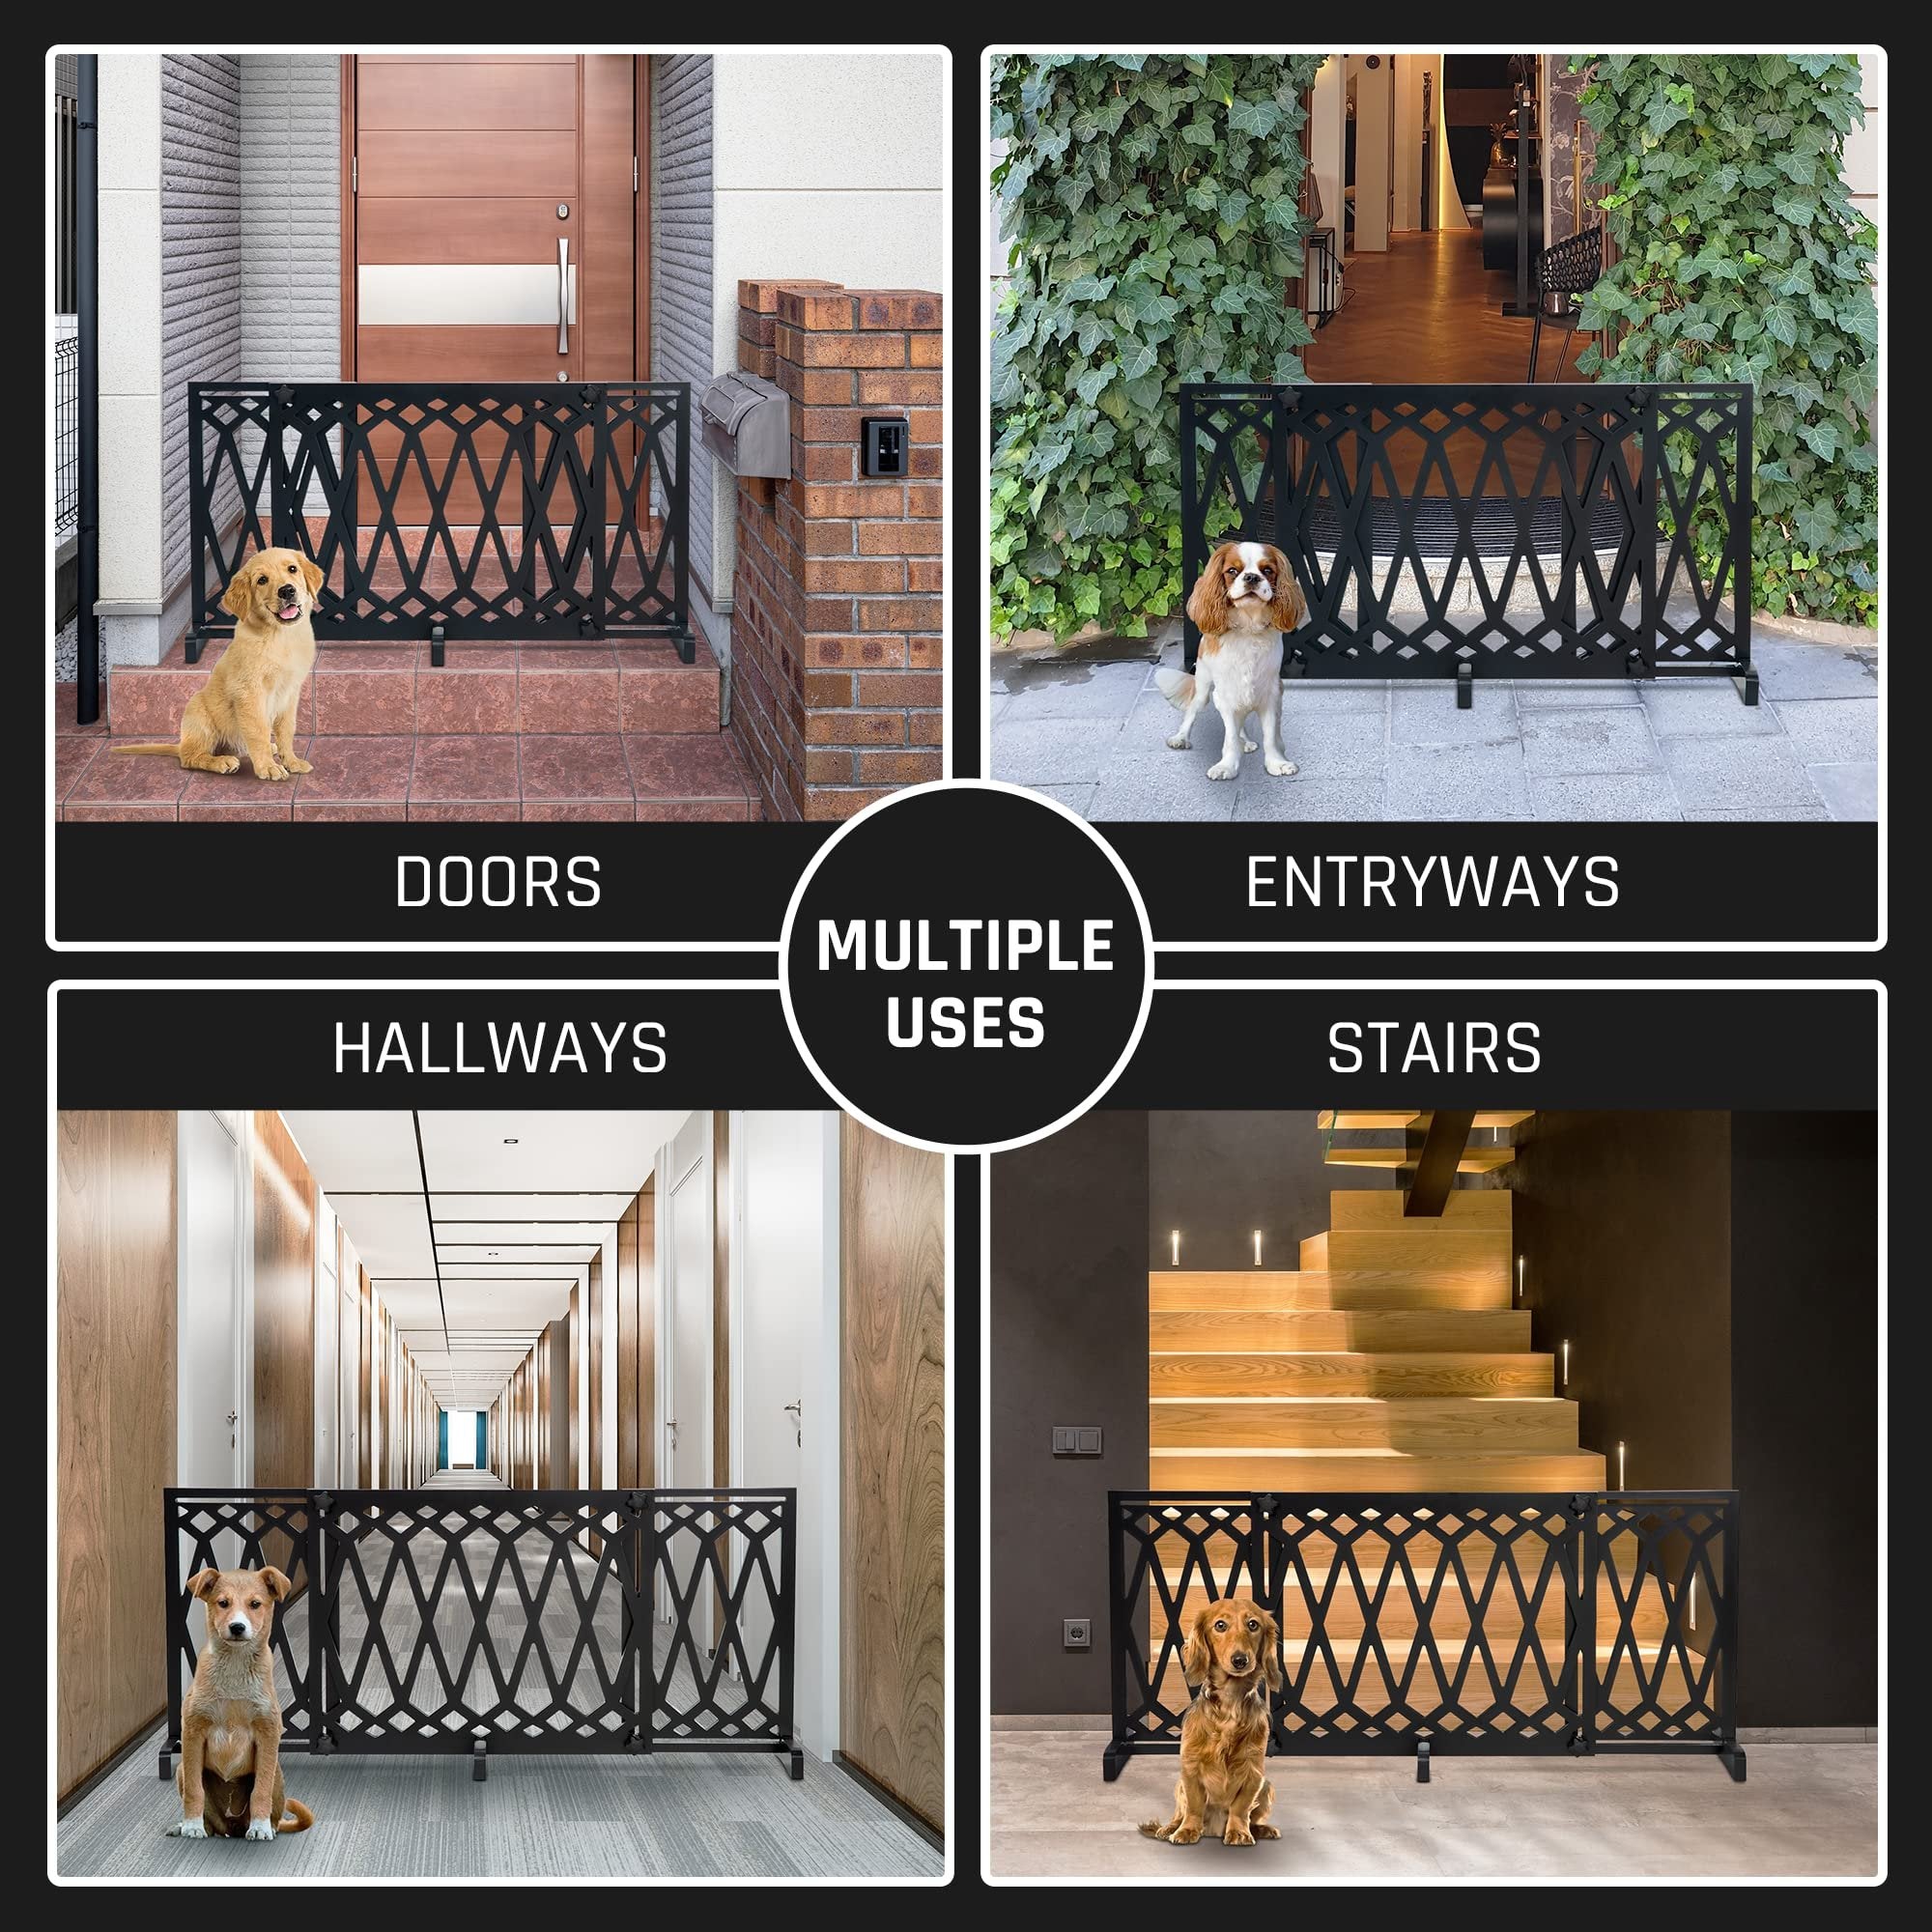 Bundaloo Freestanding Dog Gate Expandable Wooden Fence for Small to Medium Pet Dogs, Adjustable Pet Barrier for Stairs, Doorways, & Hallways (Diamond) (White)